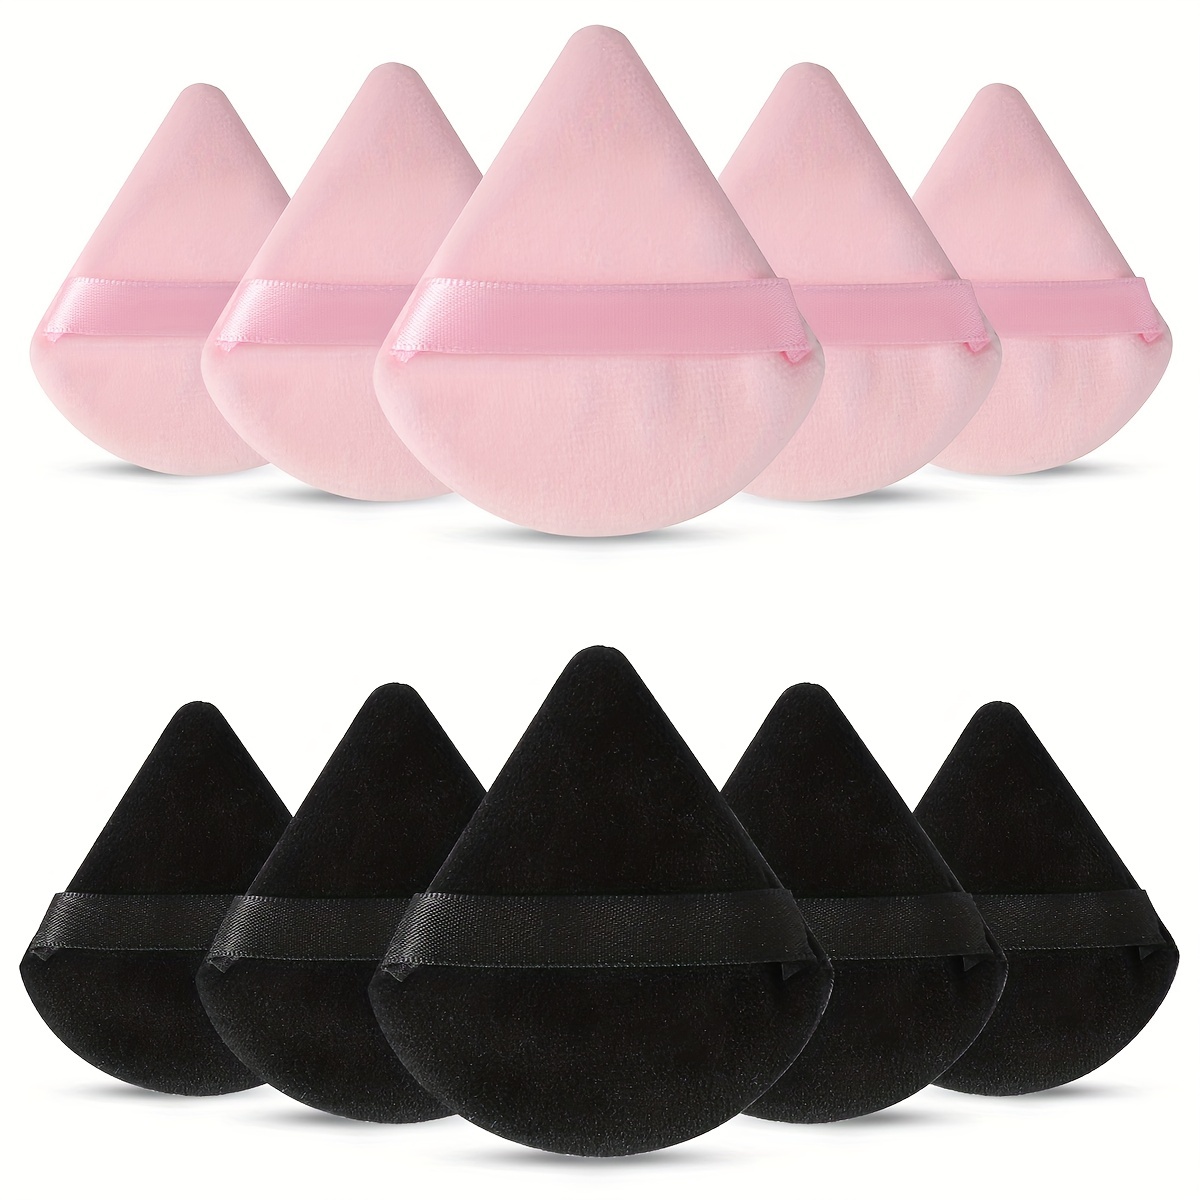 

10 Pieces Powder Puffs Triangle Cosmetic Powder Puff Reusable Soft Plush Powder Sponge Makeup Foundation Sponge For Face Body Loose Powder Wet Dry Makeup Tool